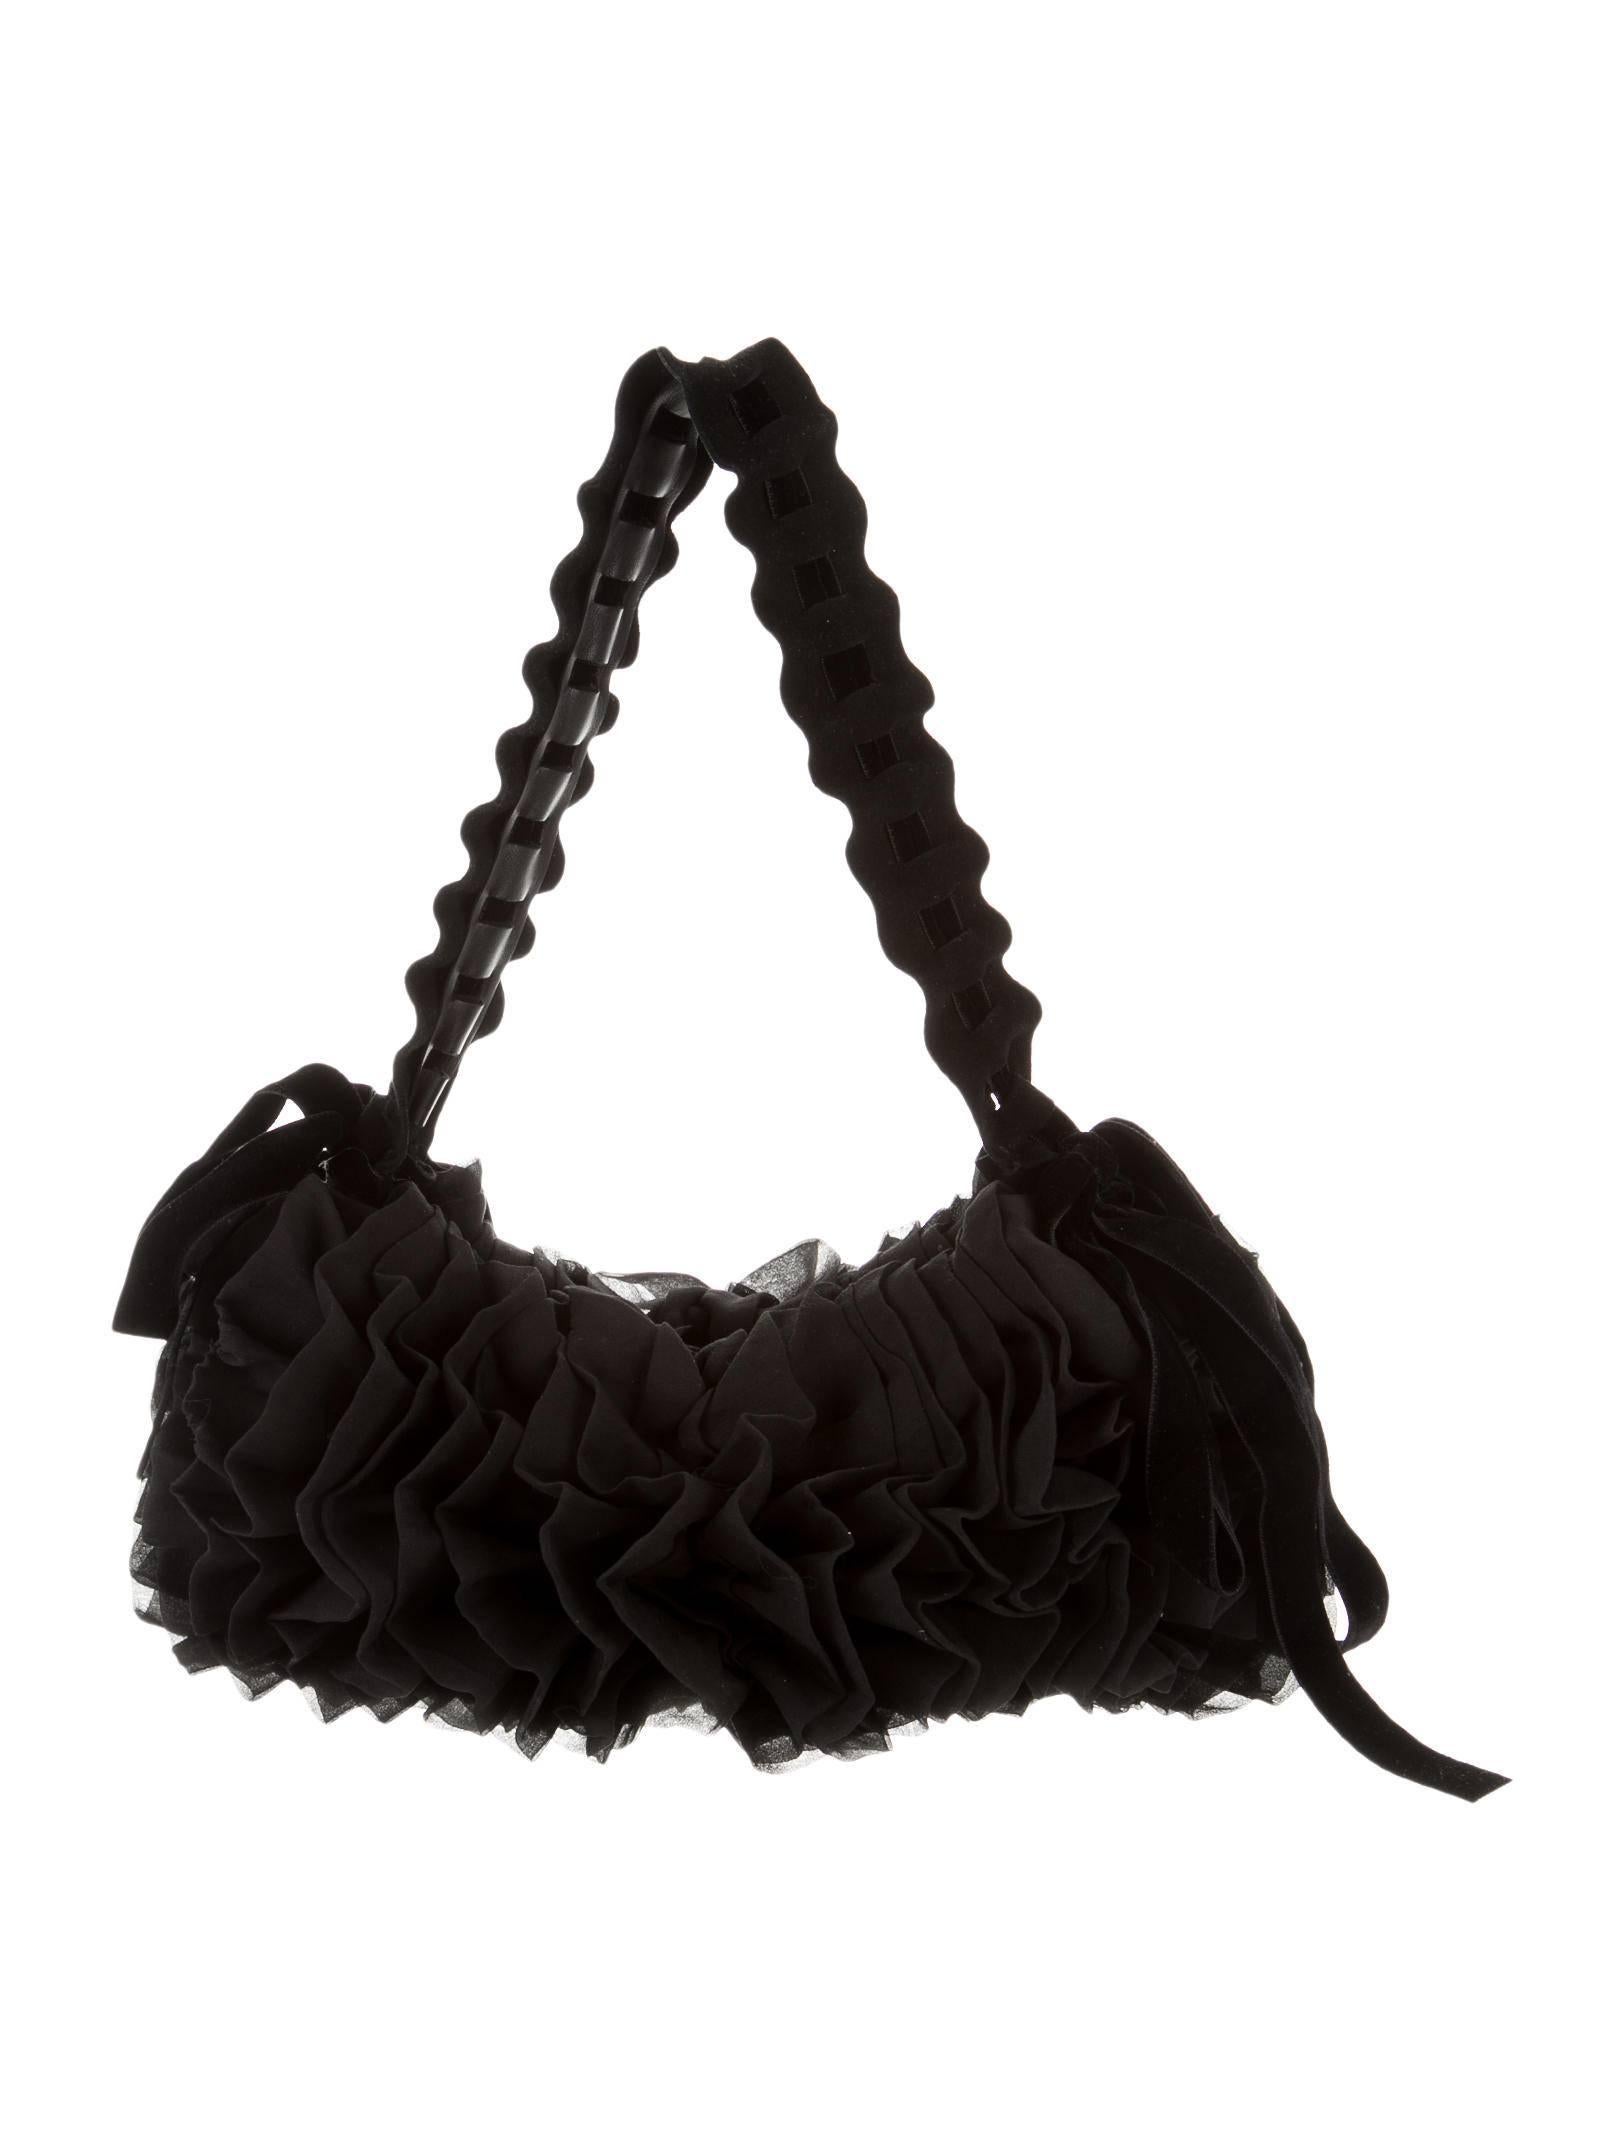 Black Tom Ford for Yves Saint Laurent Leather, Lace and Silk Evening Bag Fall 2003 For Sale